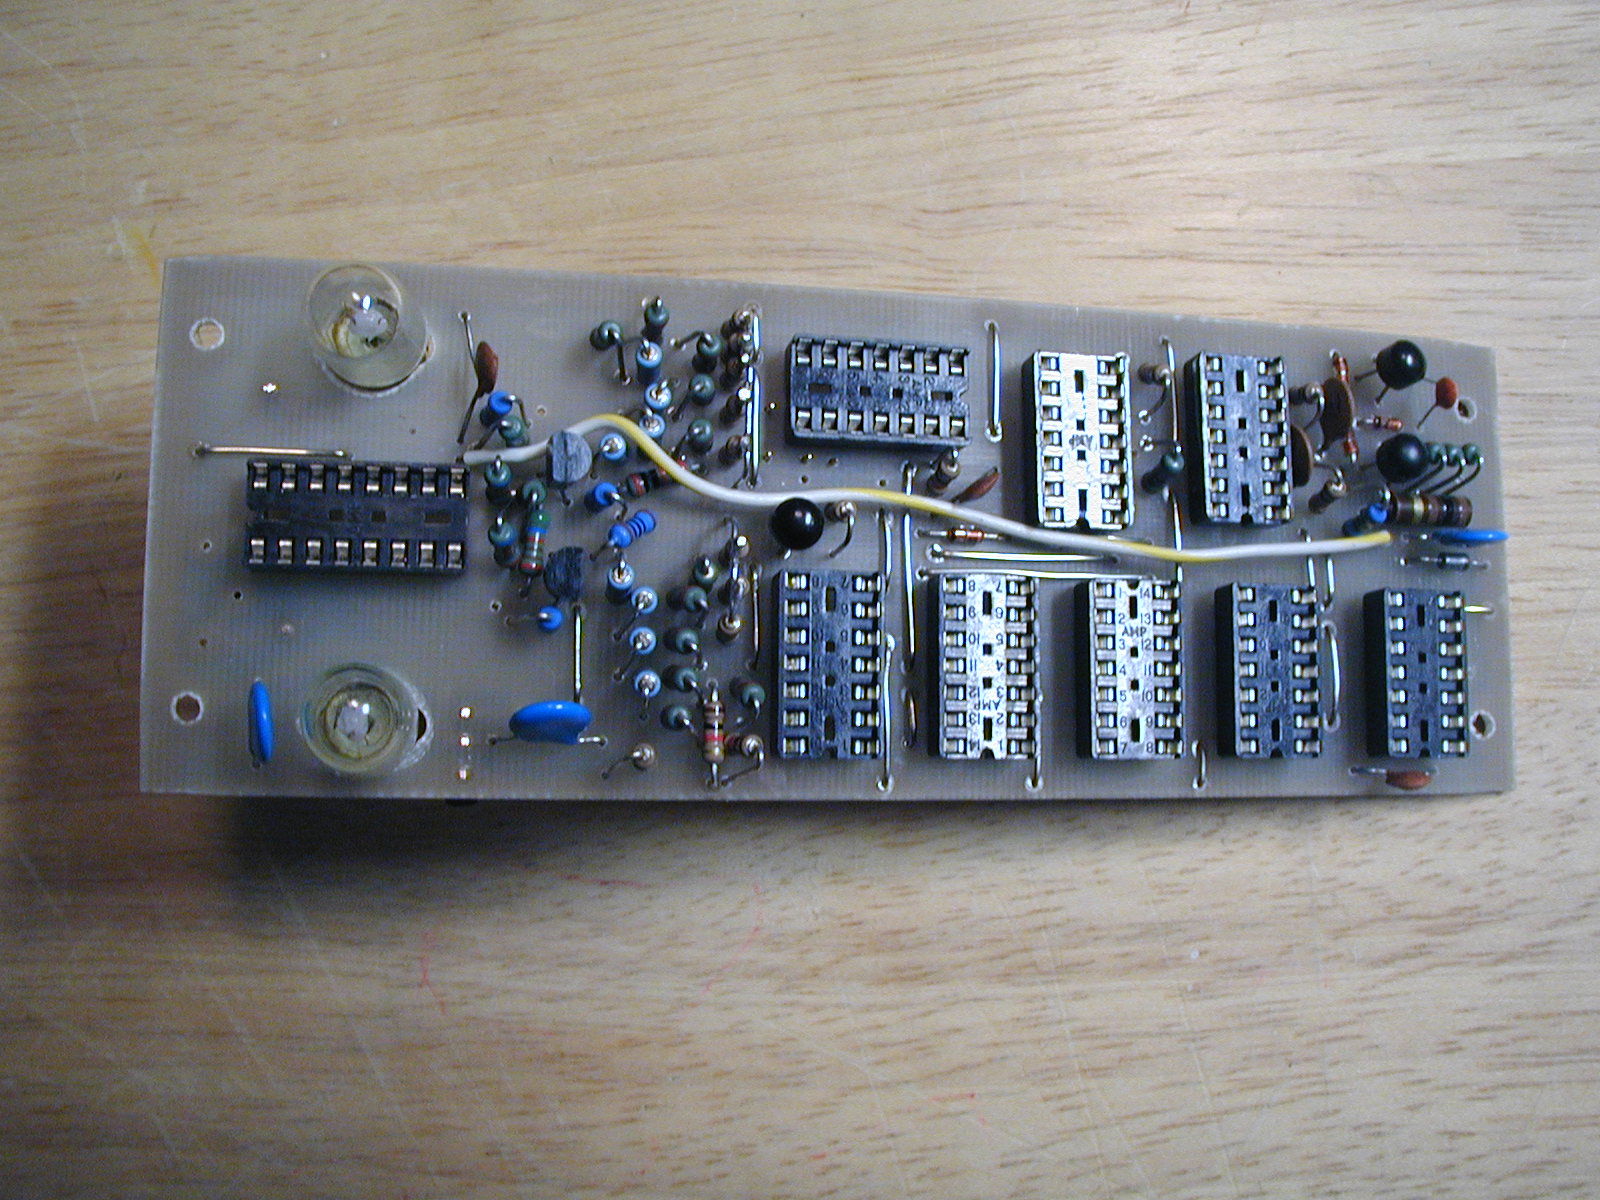 Finished, component side.